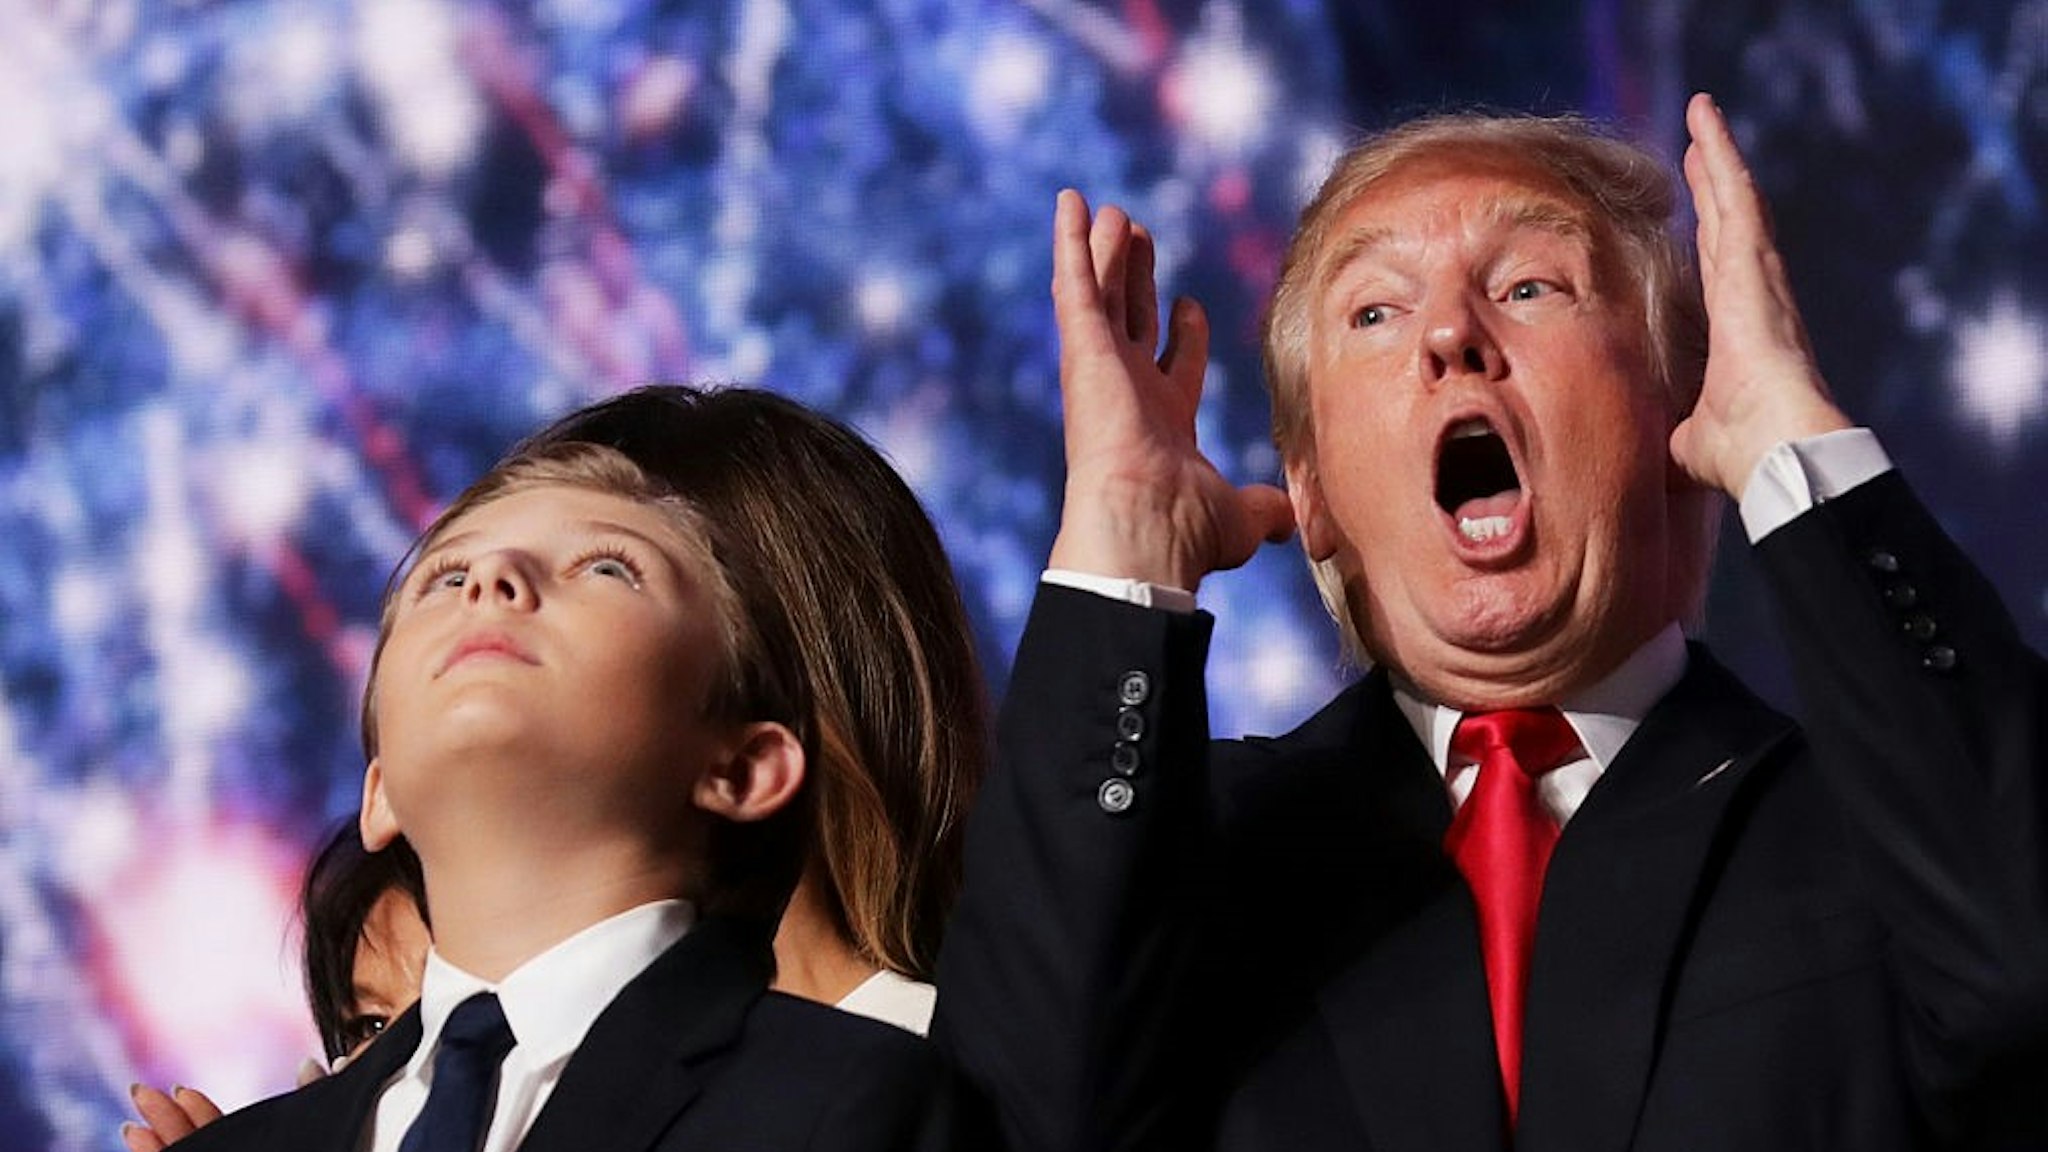 CLEVELAND, OH - JULY 21: Republican presidential candidate Donald Trump reacts as his son Barron Trump looks on at the end of the Republican National Convention on July 21, 2016 at the Quicken Loans Arena in Cleveland, Ohio. Republican presidential candidate Donald Trump received the number of votes needed to secure the party's nomination. An estimated 50,000 people are expected in Cleveland, including hundreds of protesters and members of the media. The four-day Republican National Convention kicked off on July 18. (Photo by